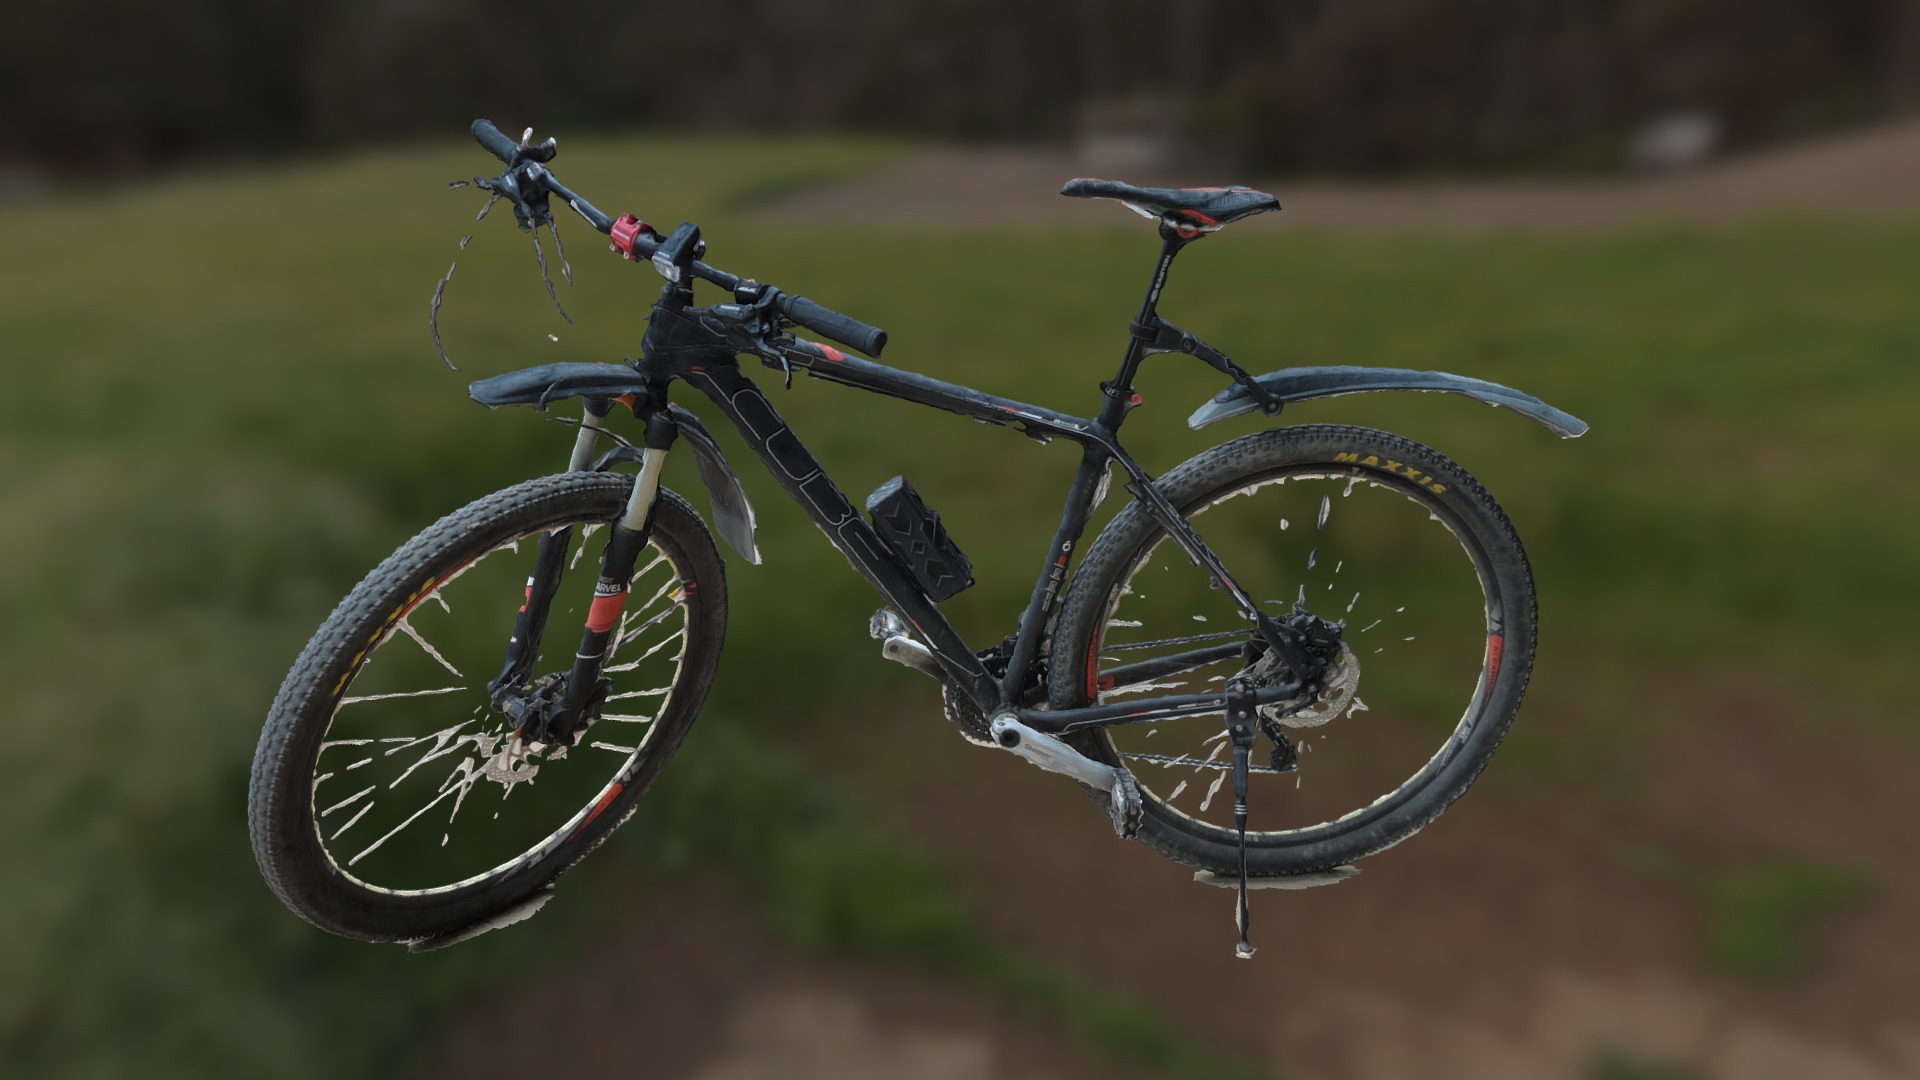 3D model Cube LTD 29 Pro 2012 - This is a 3D model of the Cube LTD 29 Pro 2012. The 3D model is about a bicycle parked in a field.